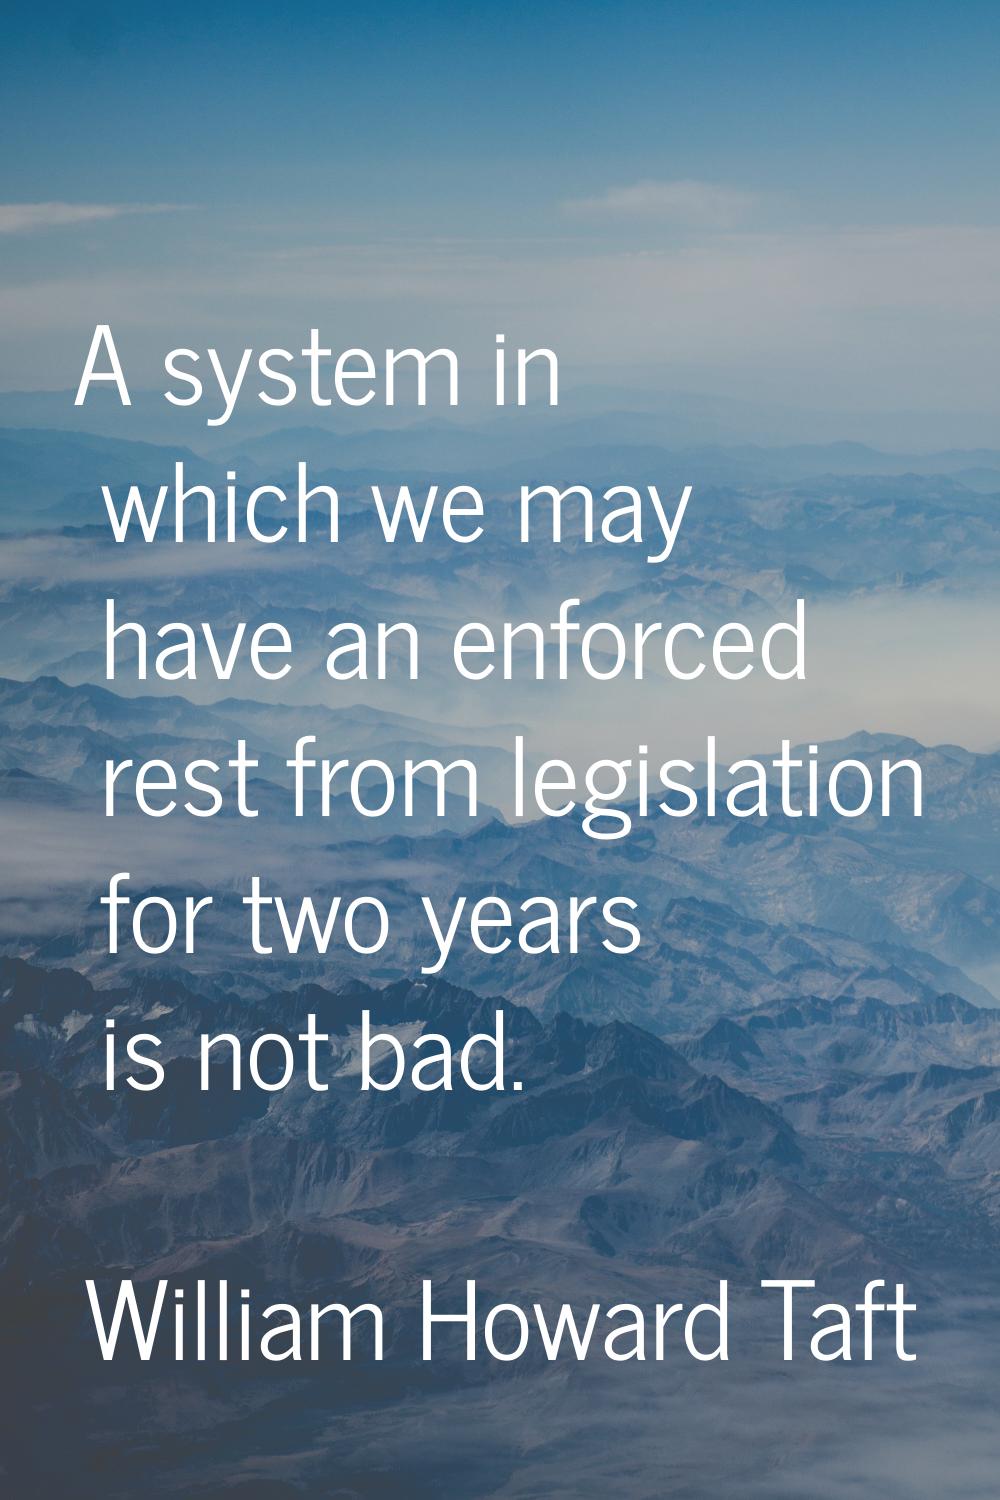 A system in which we may have an enforced rest from legislation for two years is not bad.